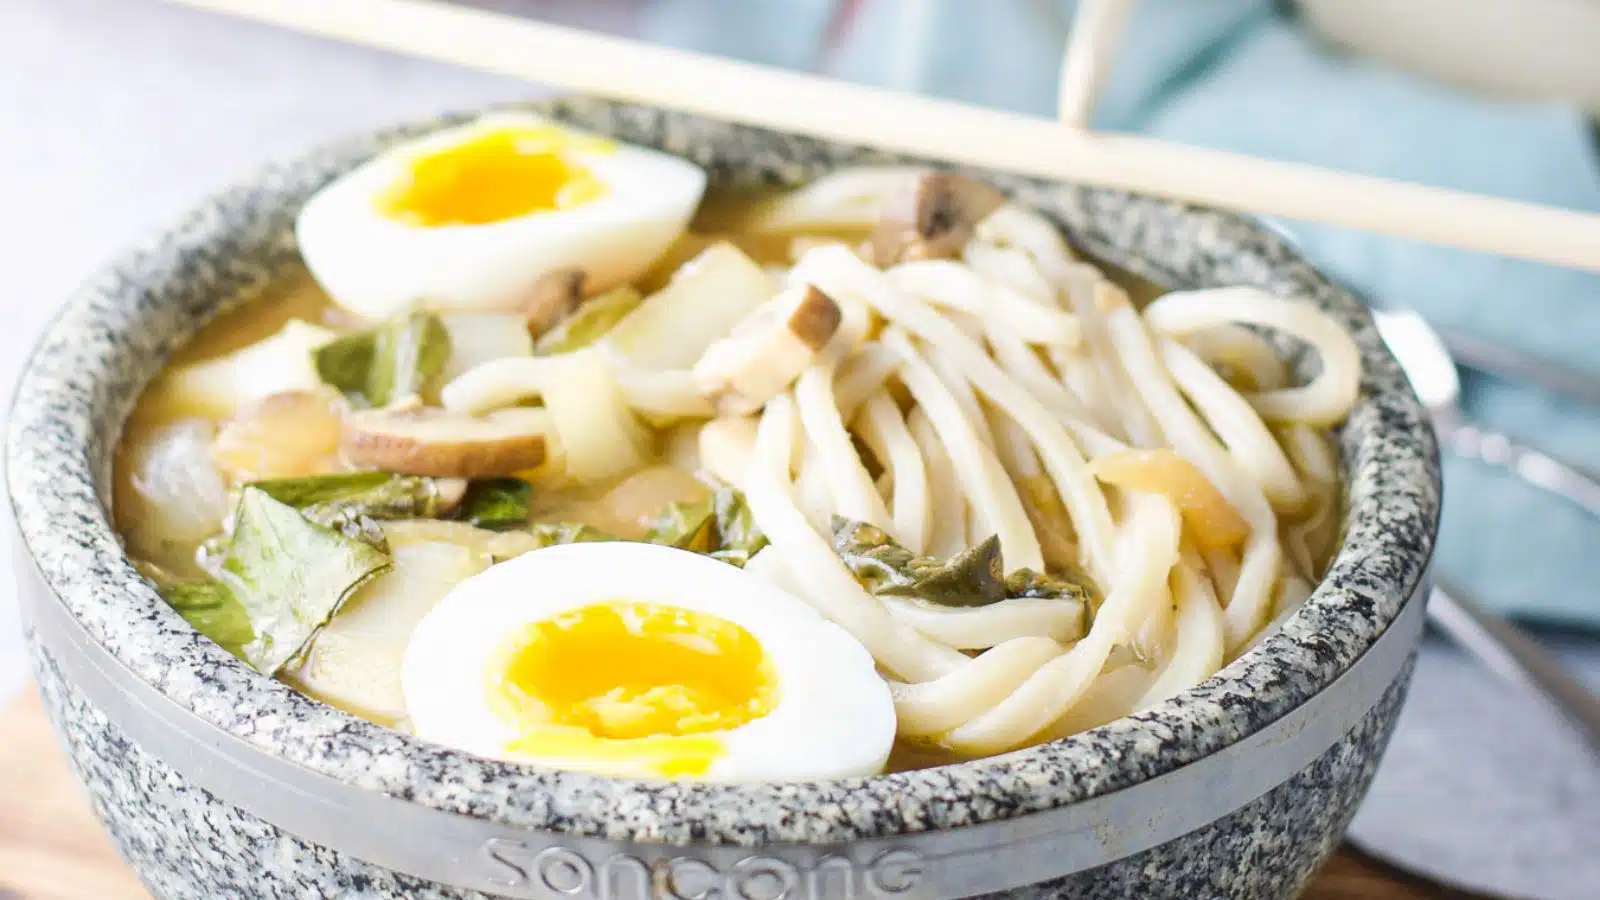 a stone bowl filled with udon noodles, egg halves and soup